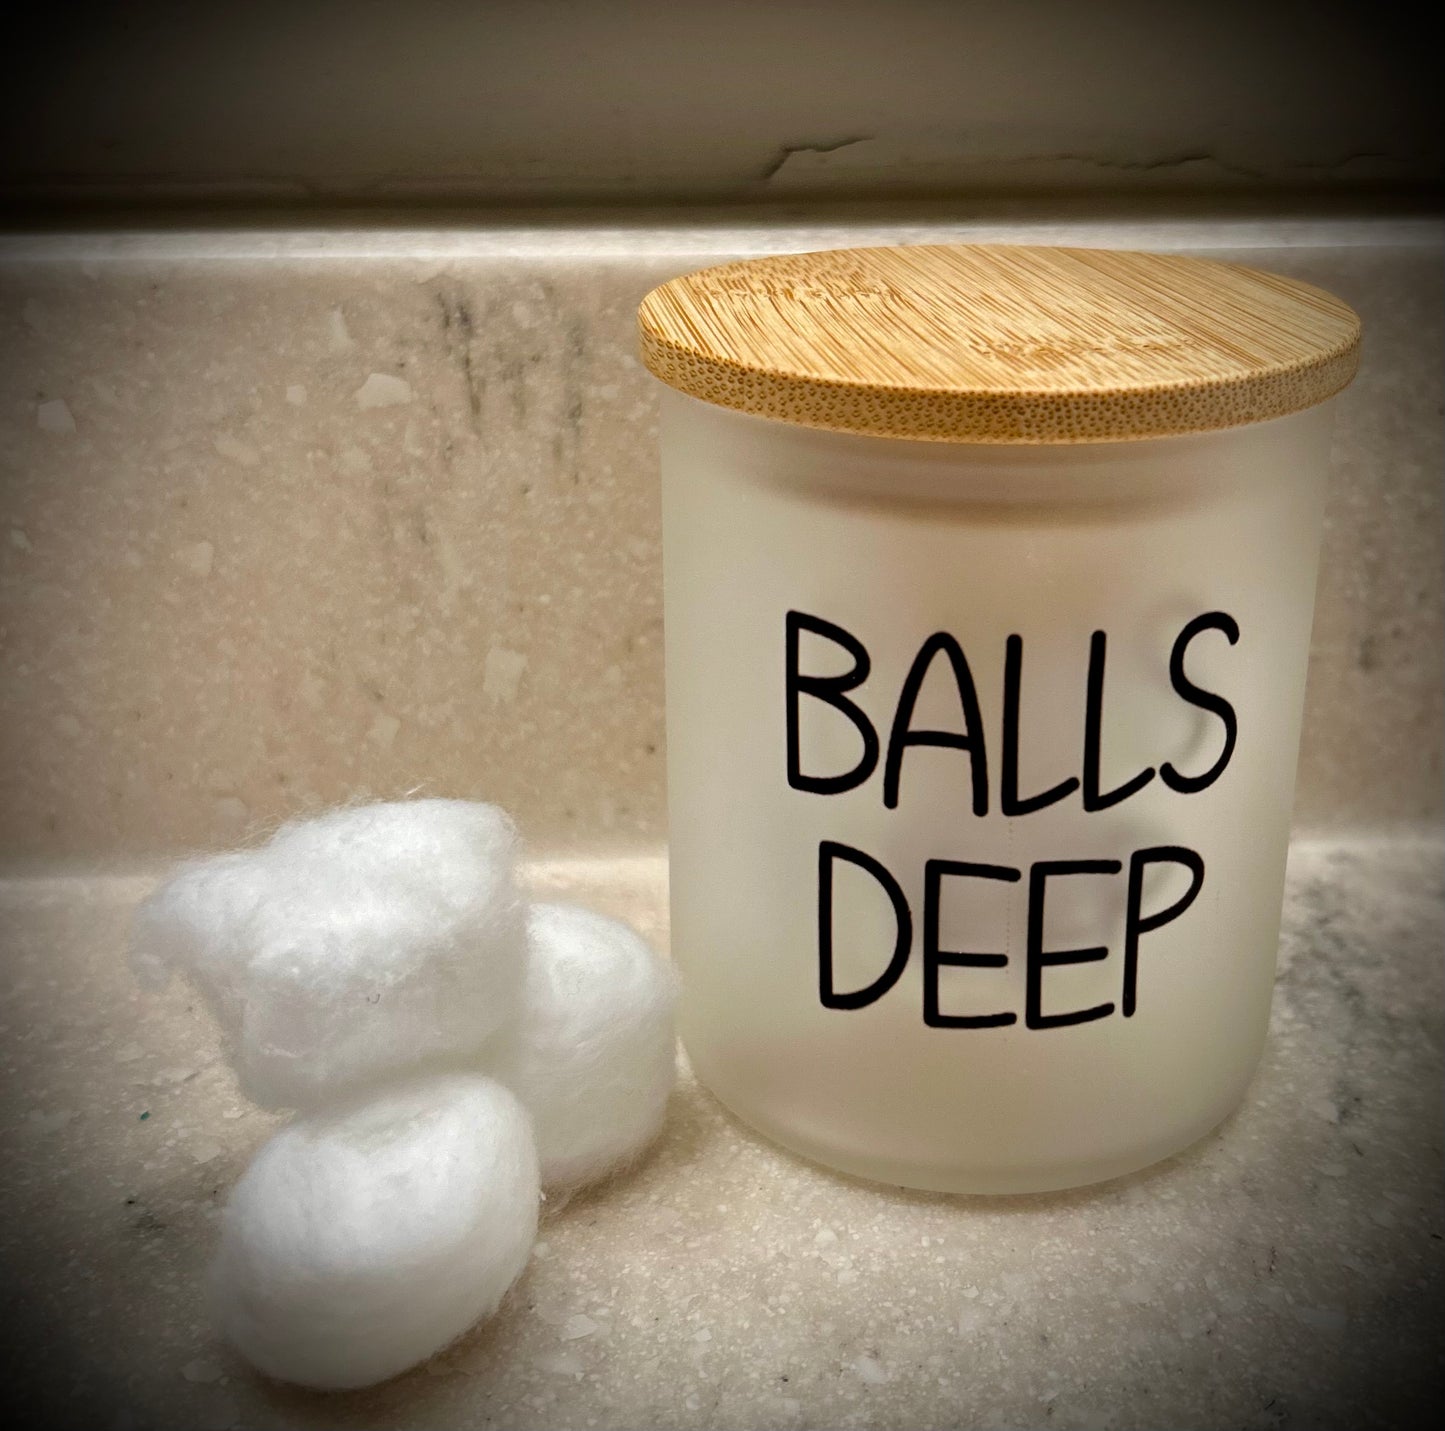 Funny Bathroom Glass canisters